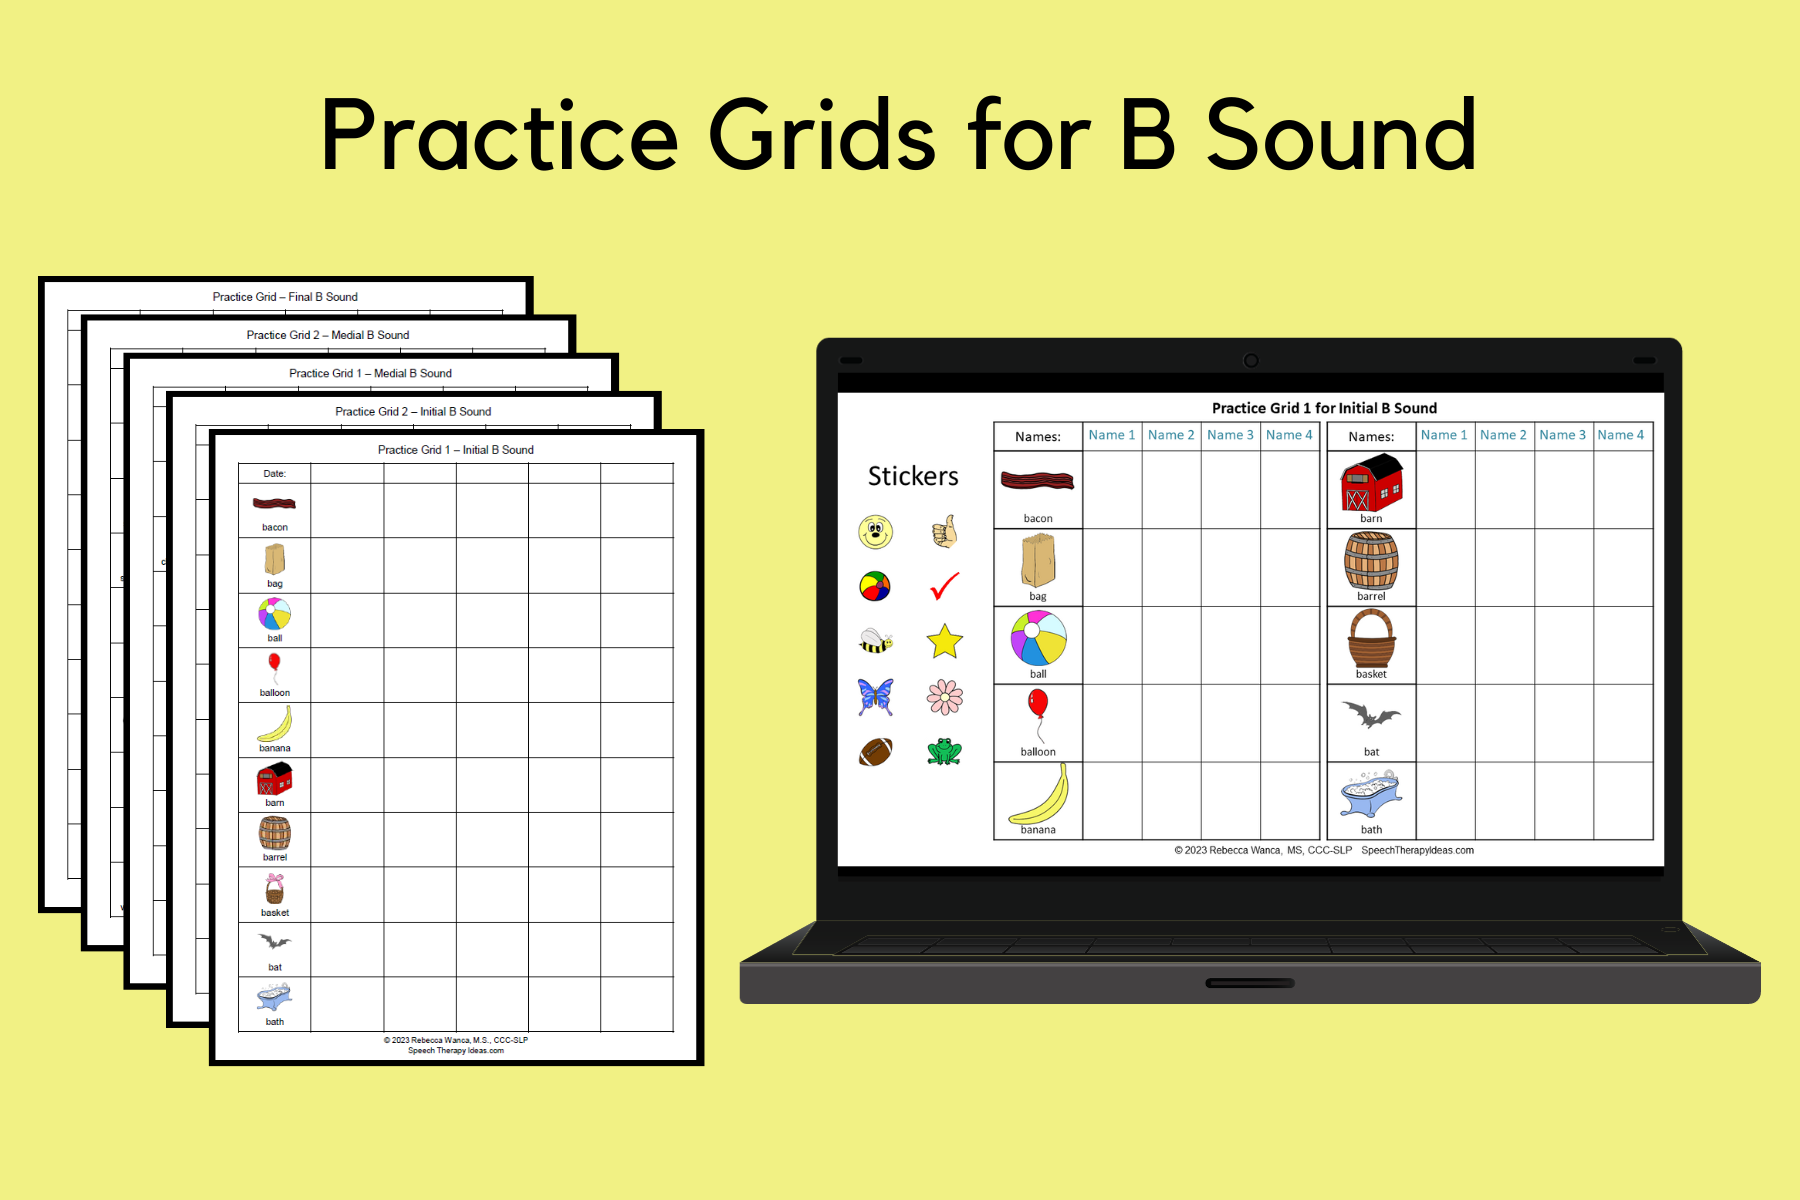 Practice Grids for B Sound